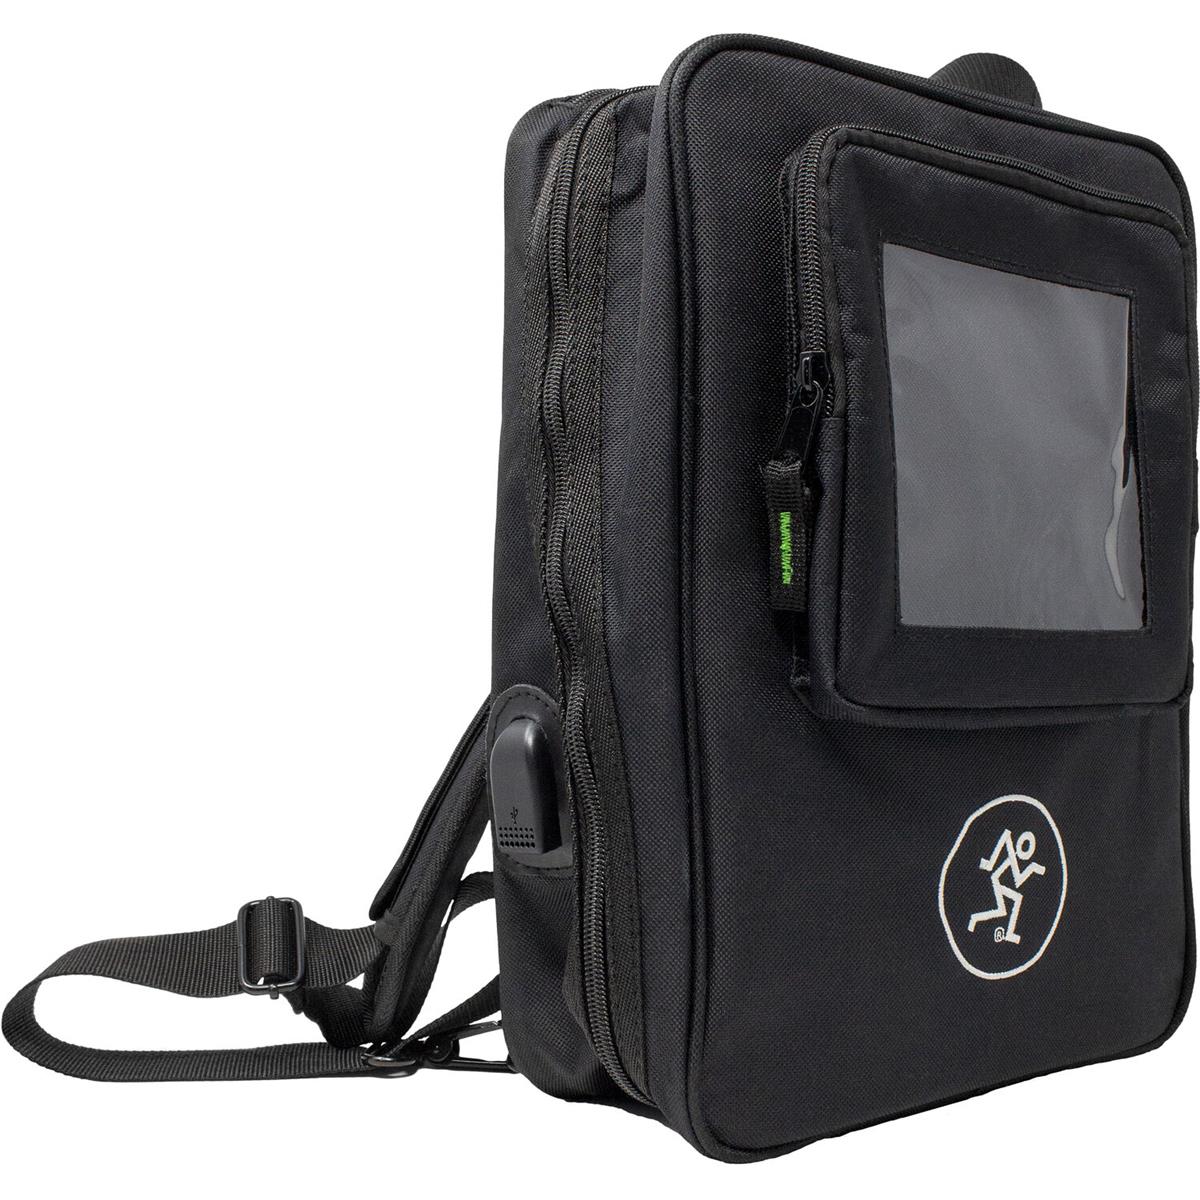 Image of Mackie Sling Bag for MCaster Live Portable Live Streaming Mixer